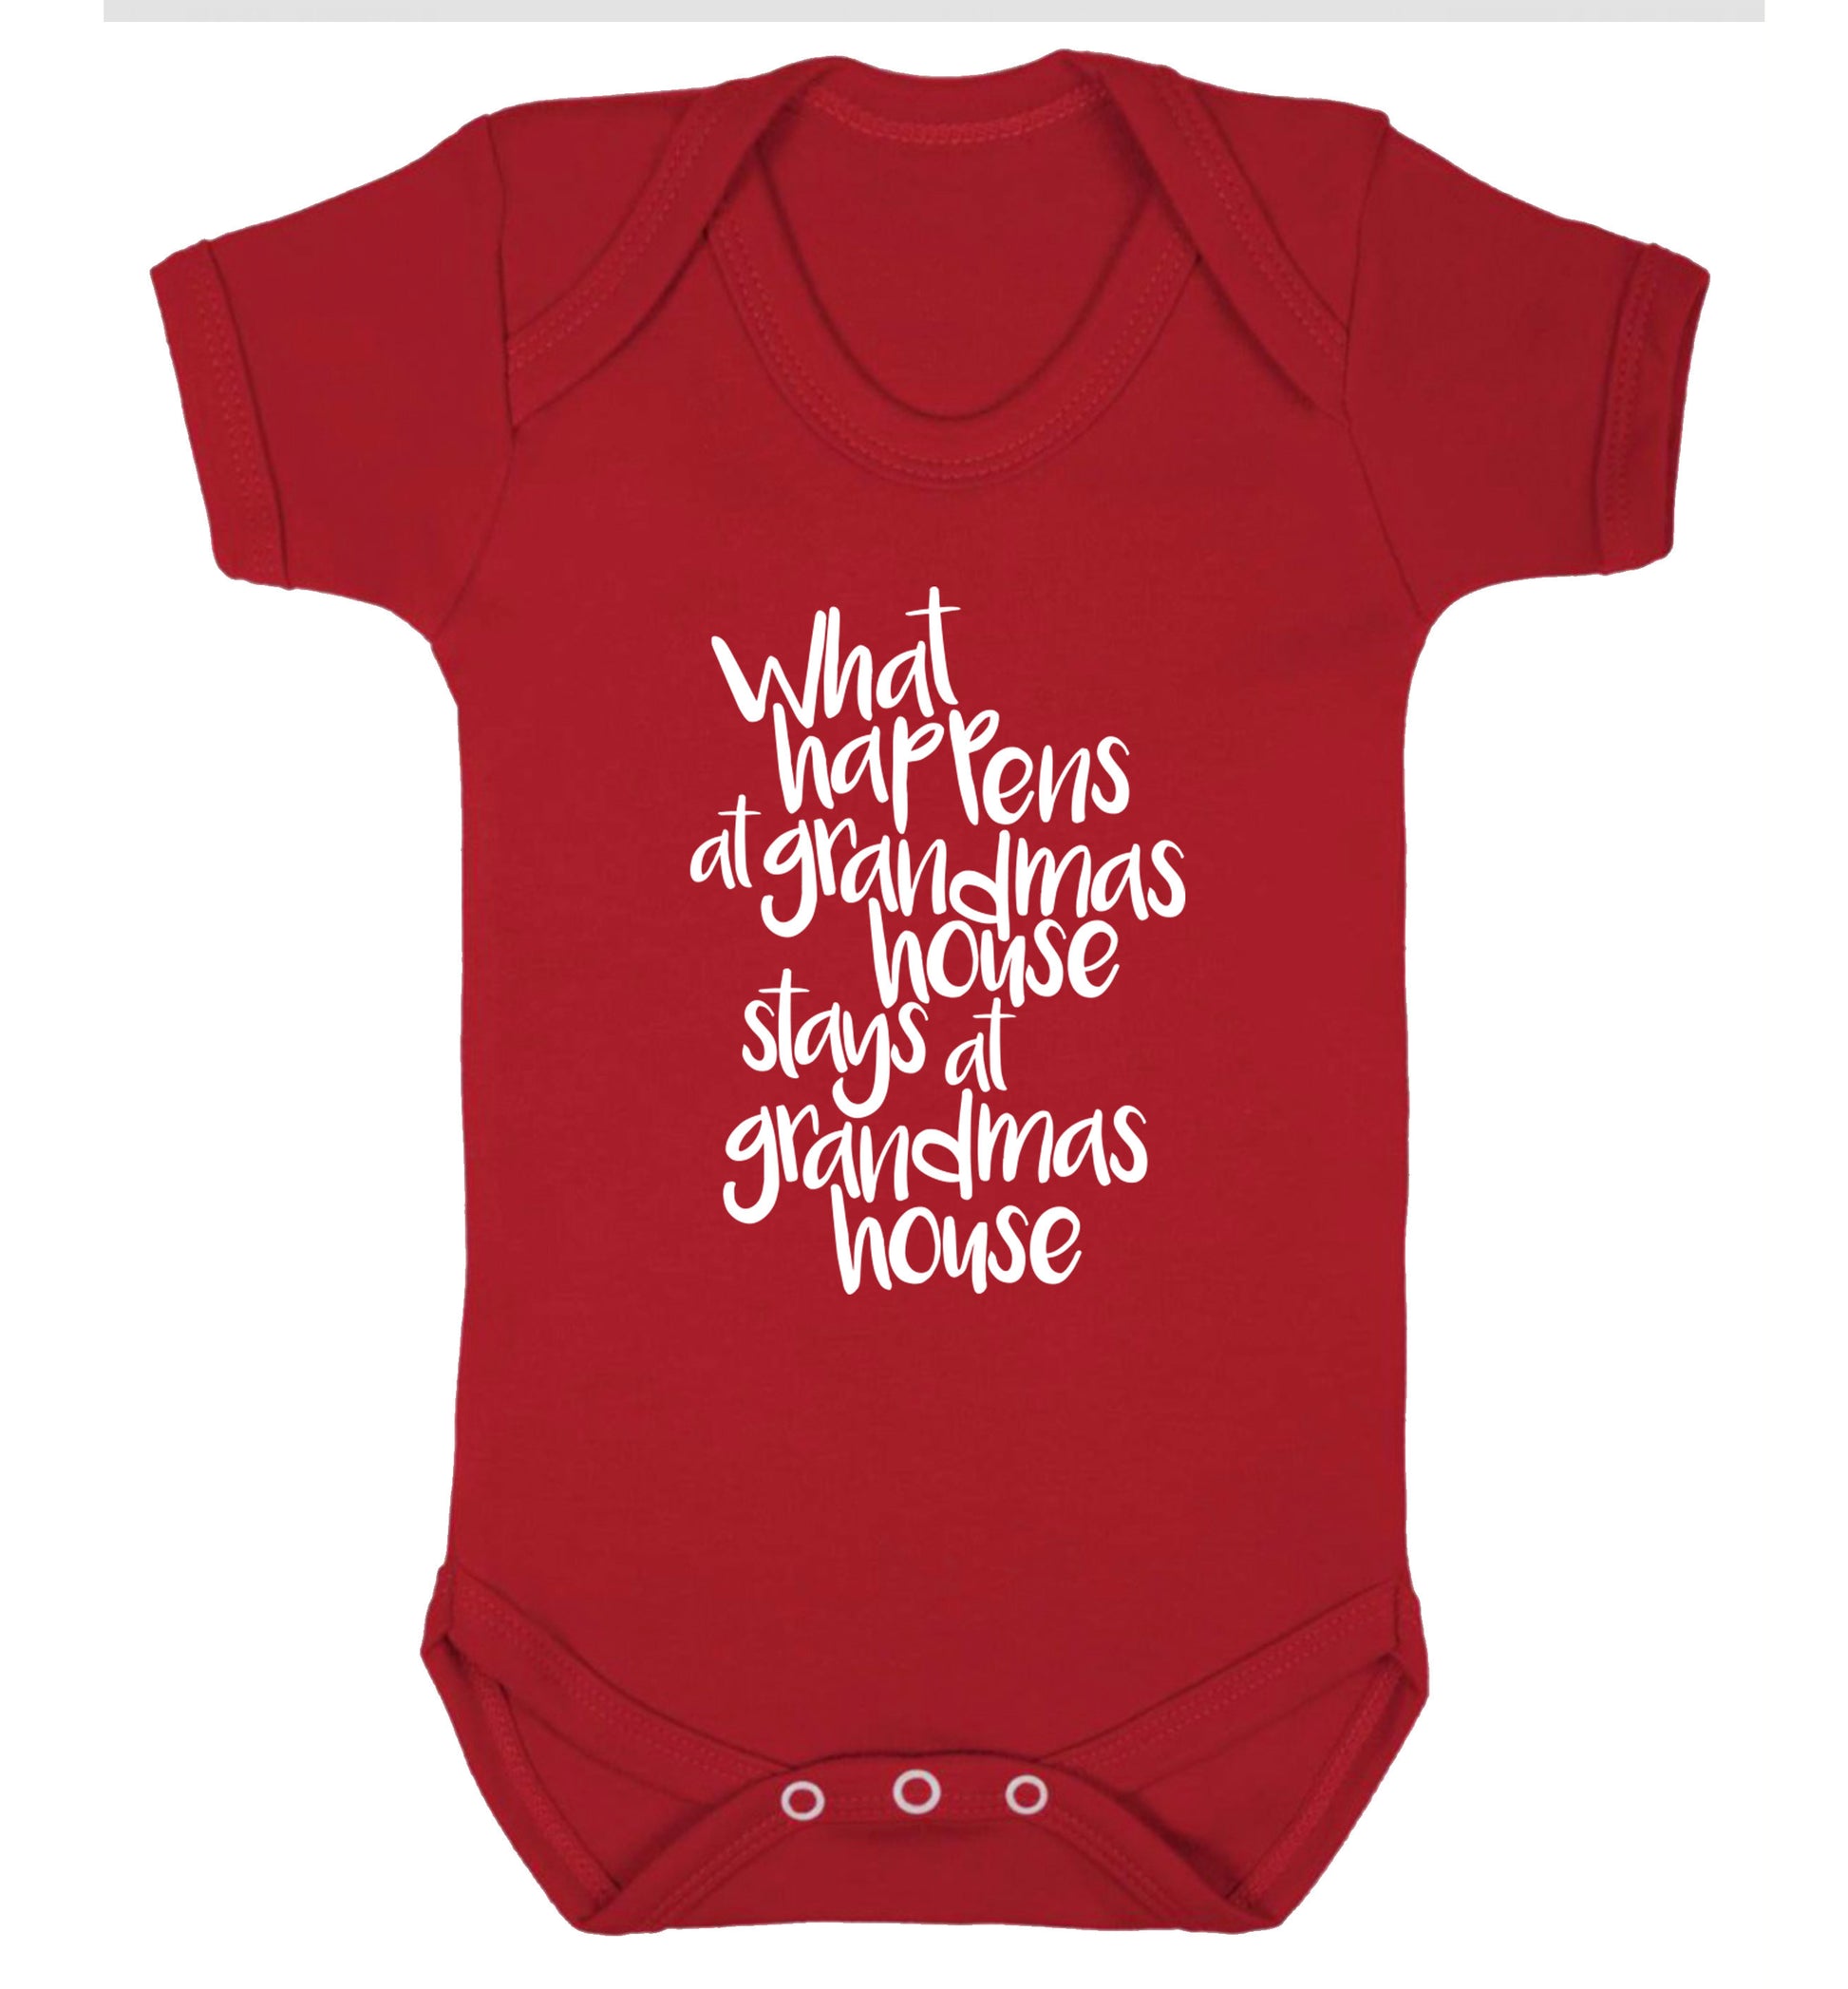 What happens at grandmas house stays at grandmas house Baby Vest red 18-24 months